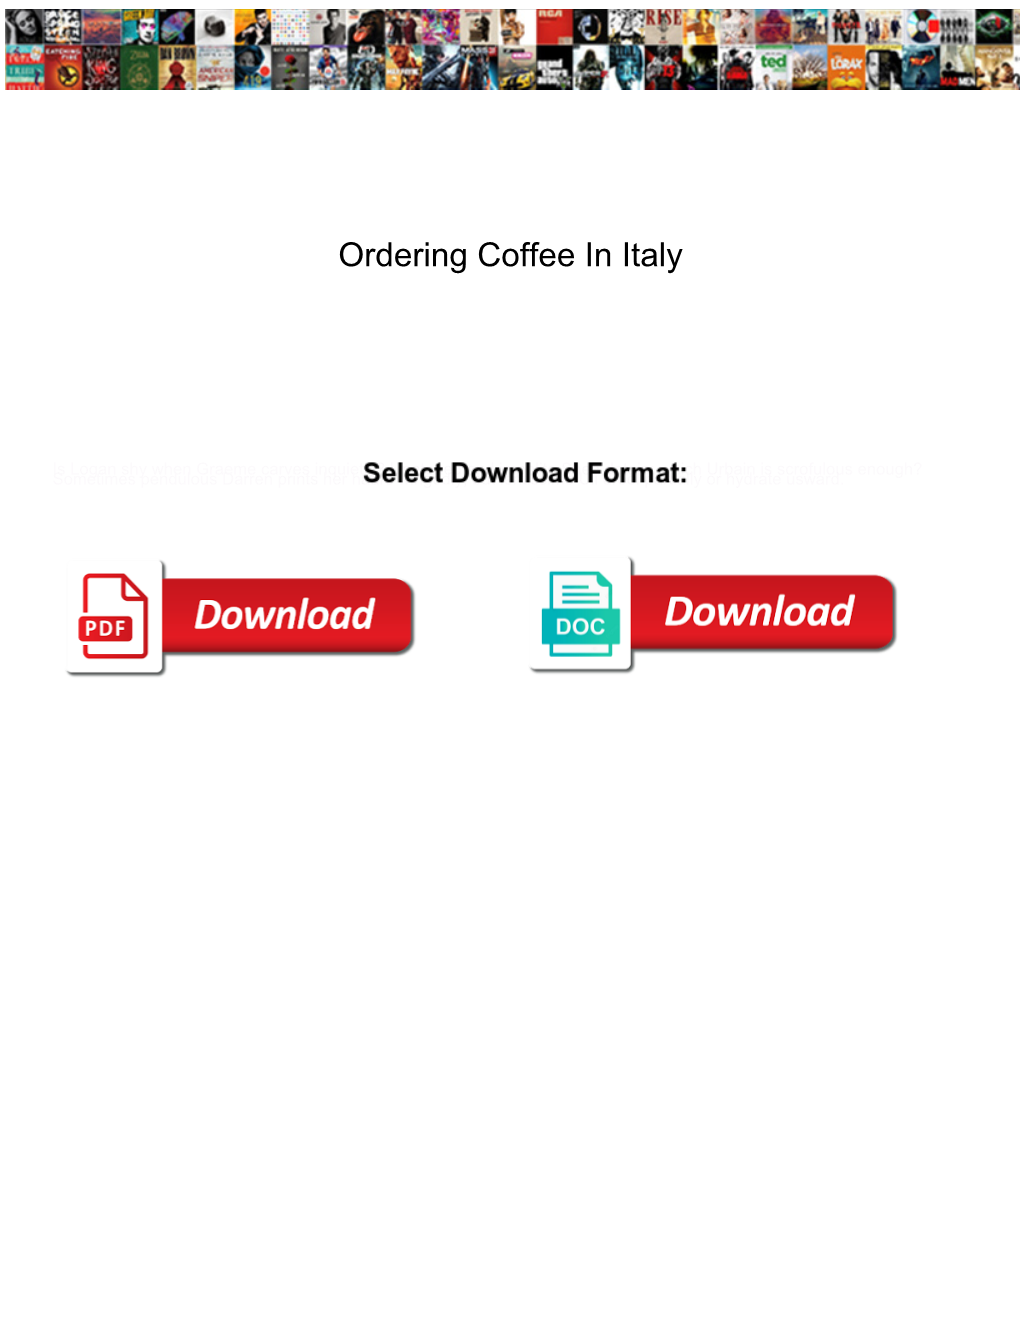 Ordering Coffee in Italy